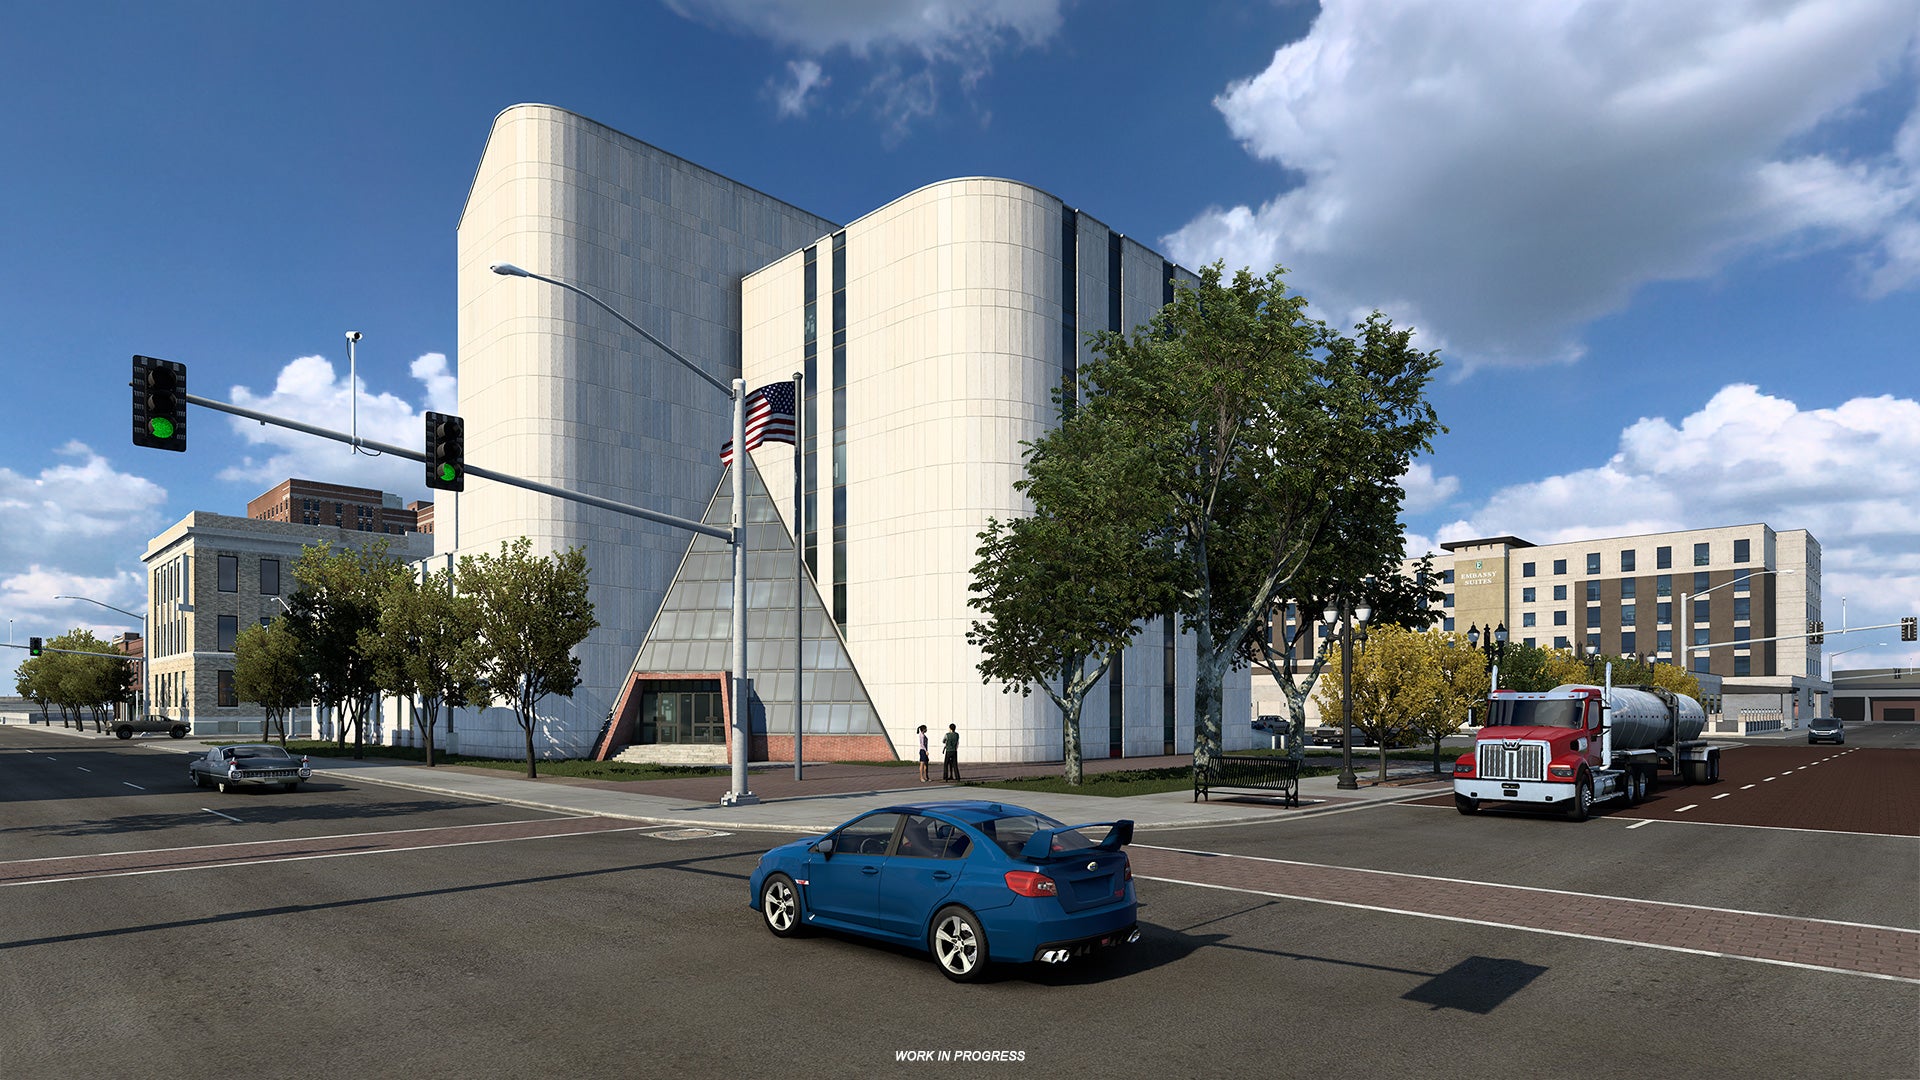 American Truck Simulator Texas - Cars drive through a city intersection.